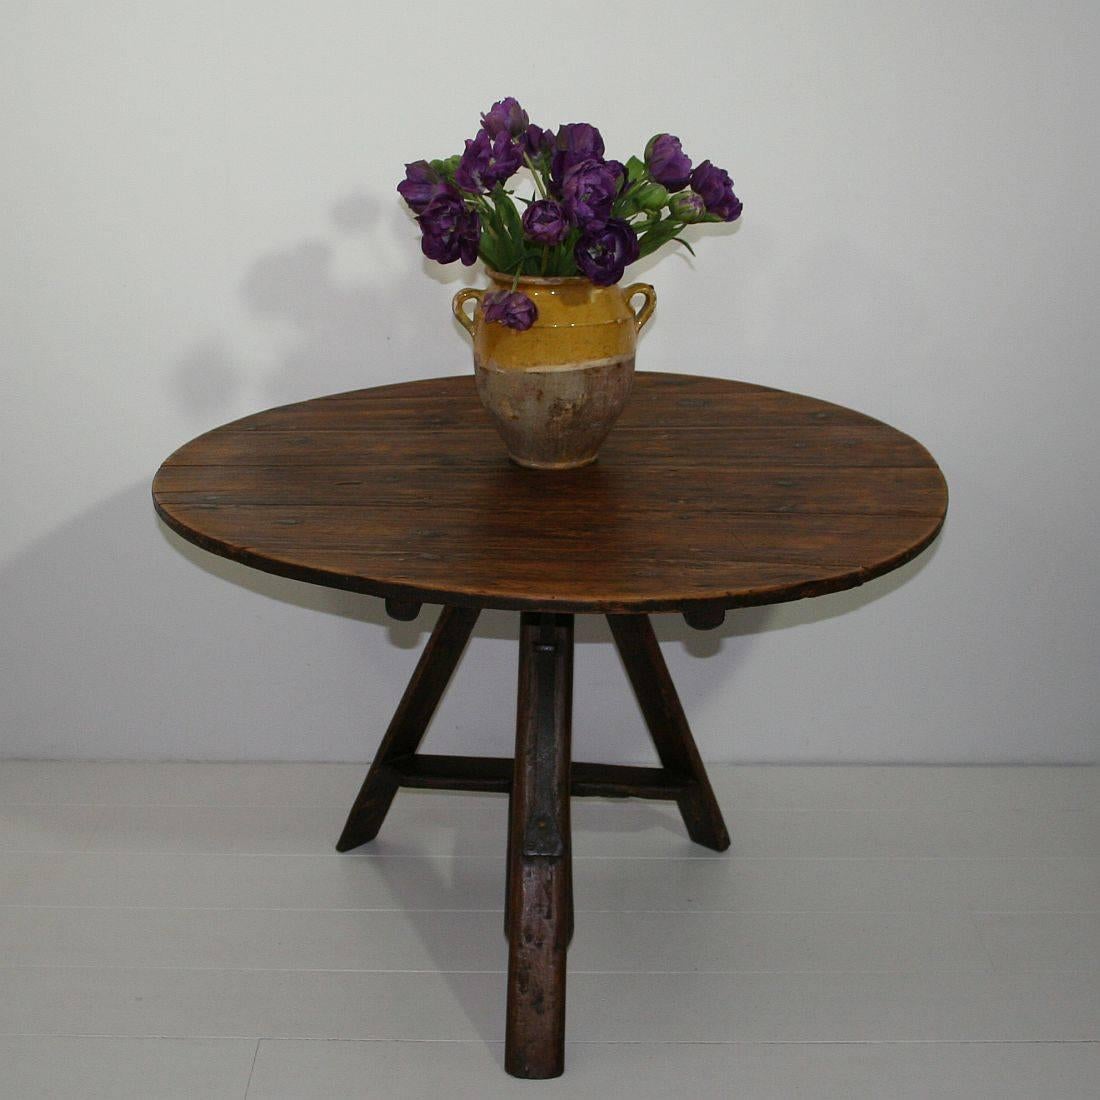 Great folk-art tilt-top table with stunning patina and color. Nice tripod base and wrought iron latch or support. Weathered but despite of its age in a relative good condition.